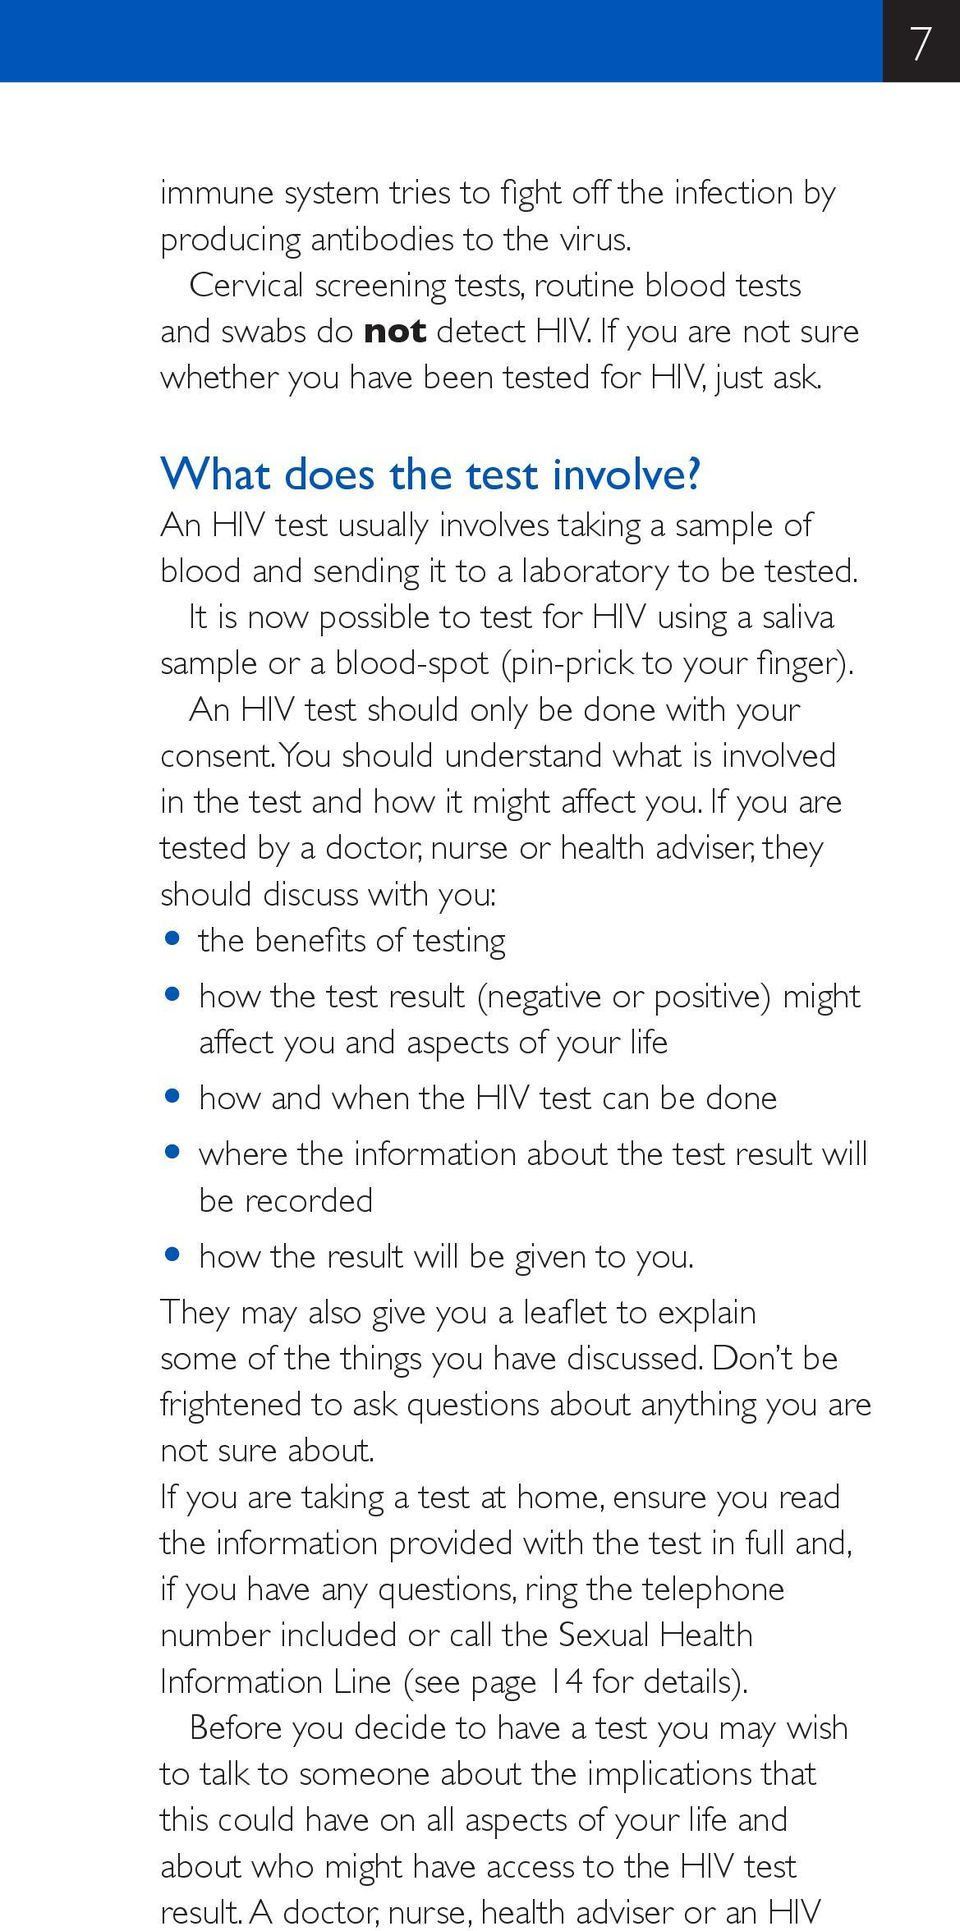 It is now possible to test for HIV using a saliva sample or a blood-spot (pin-prick to your finger). An HIV test should only be done with your consent.